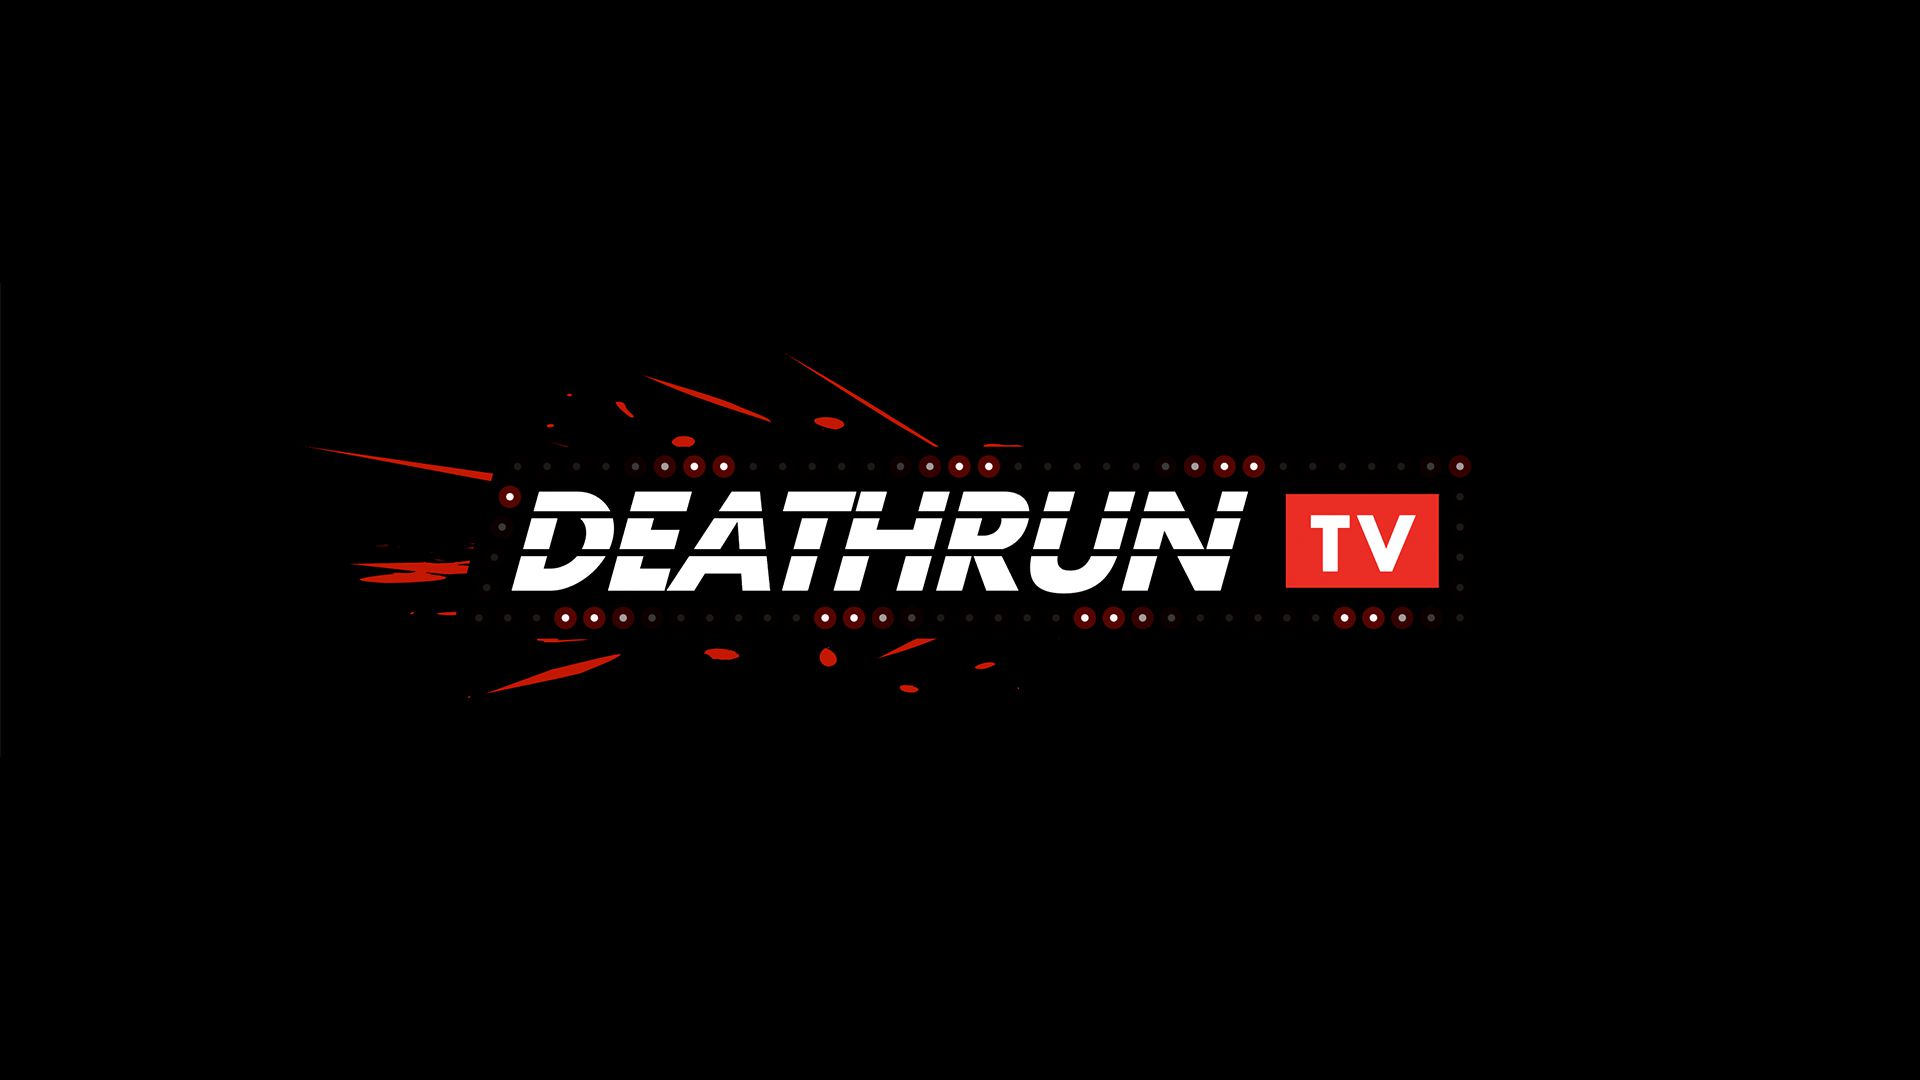 DEATHRUN TV for ipod download